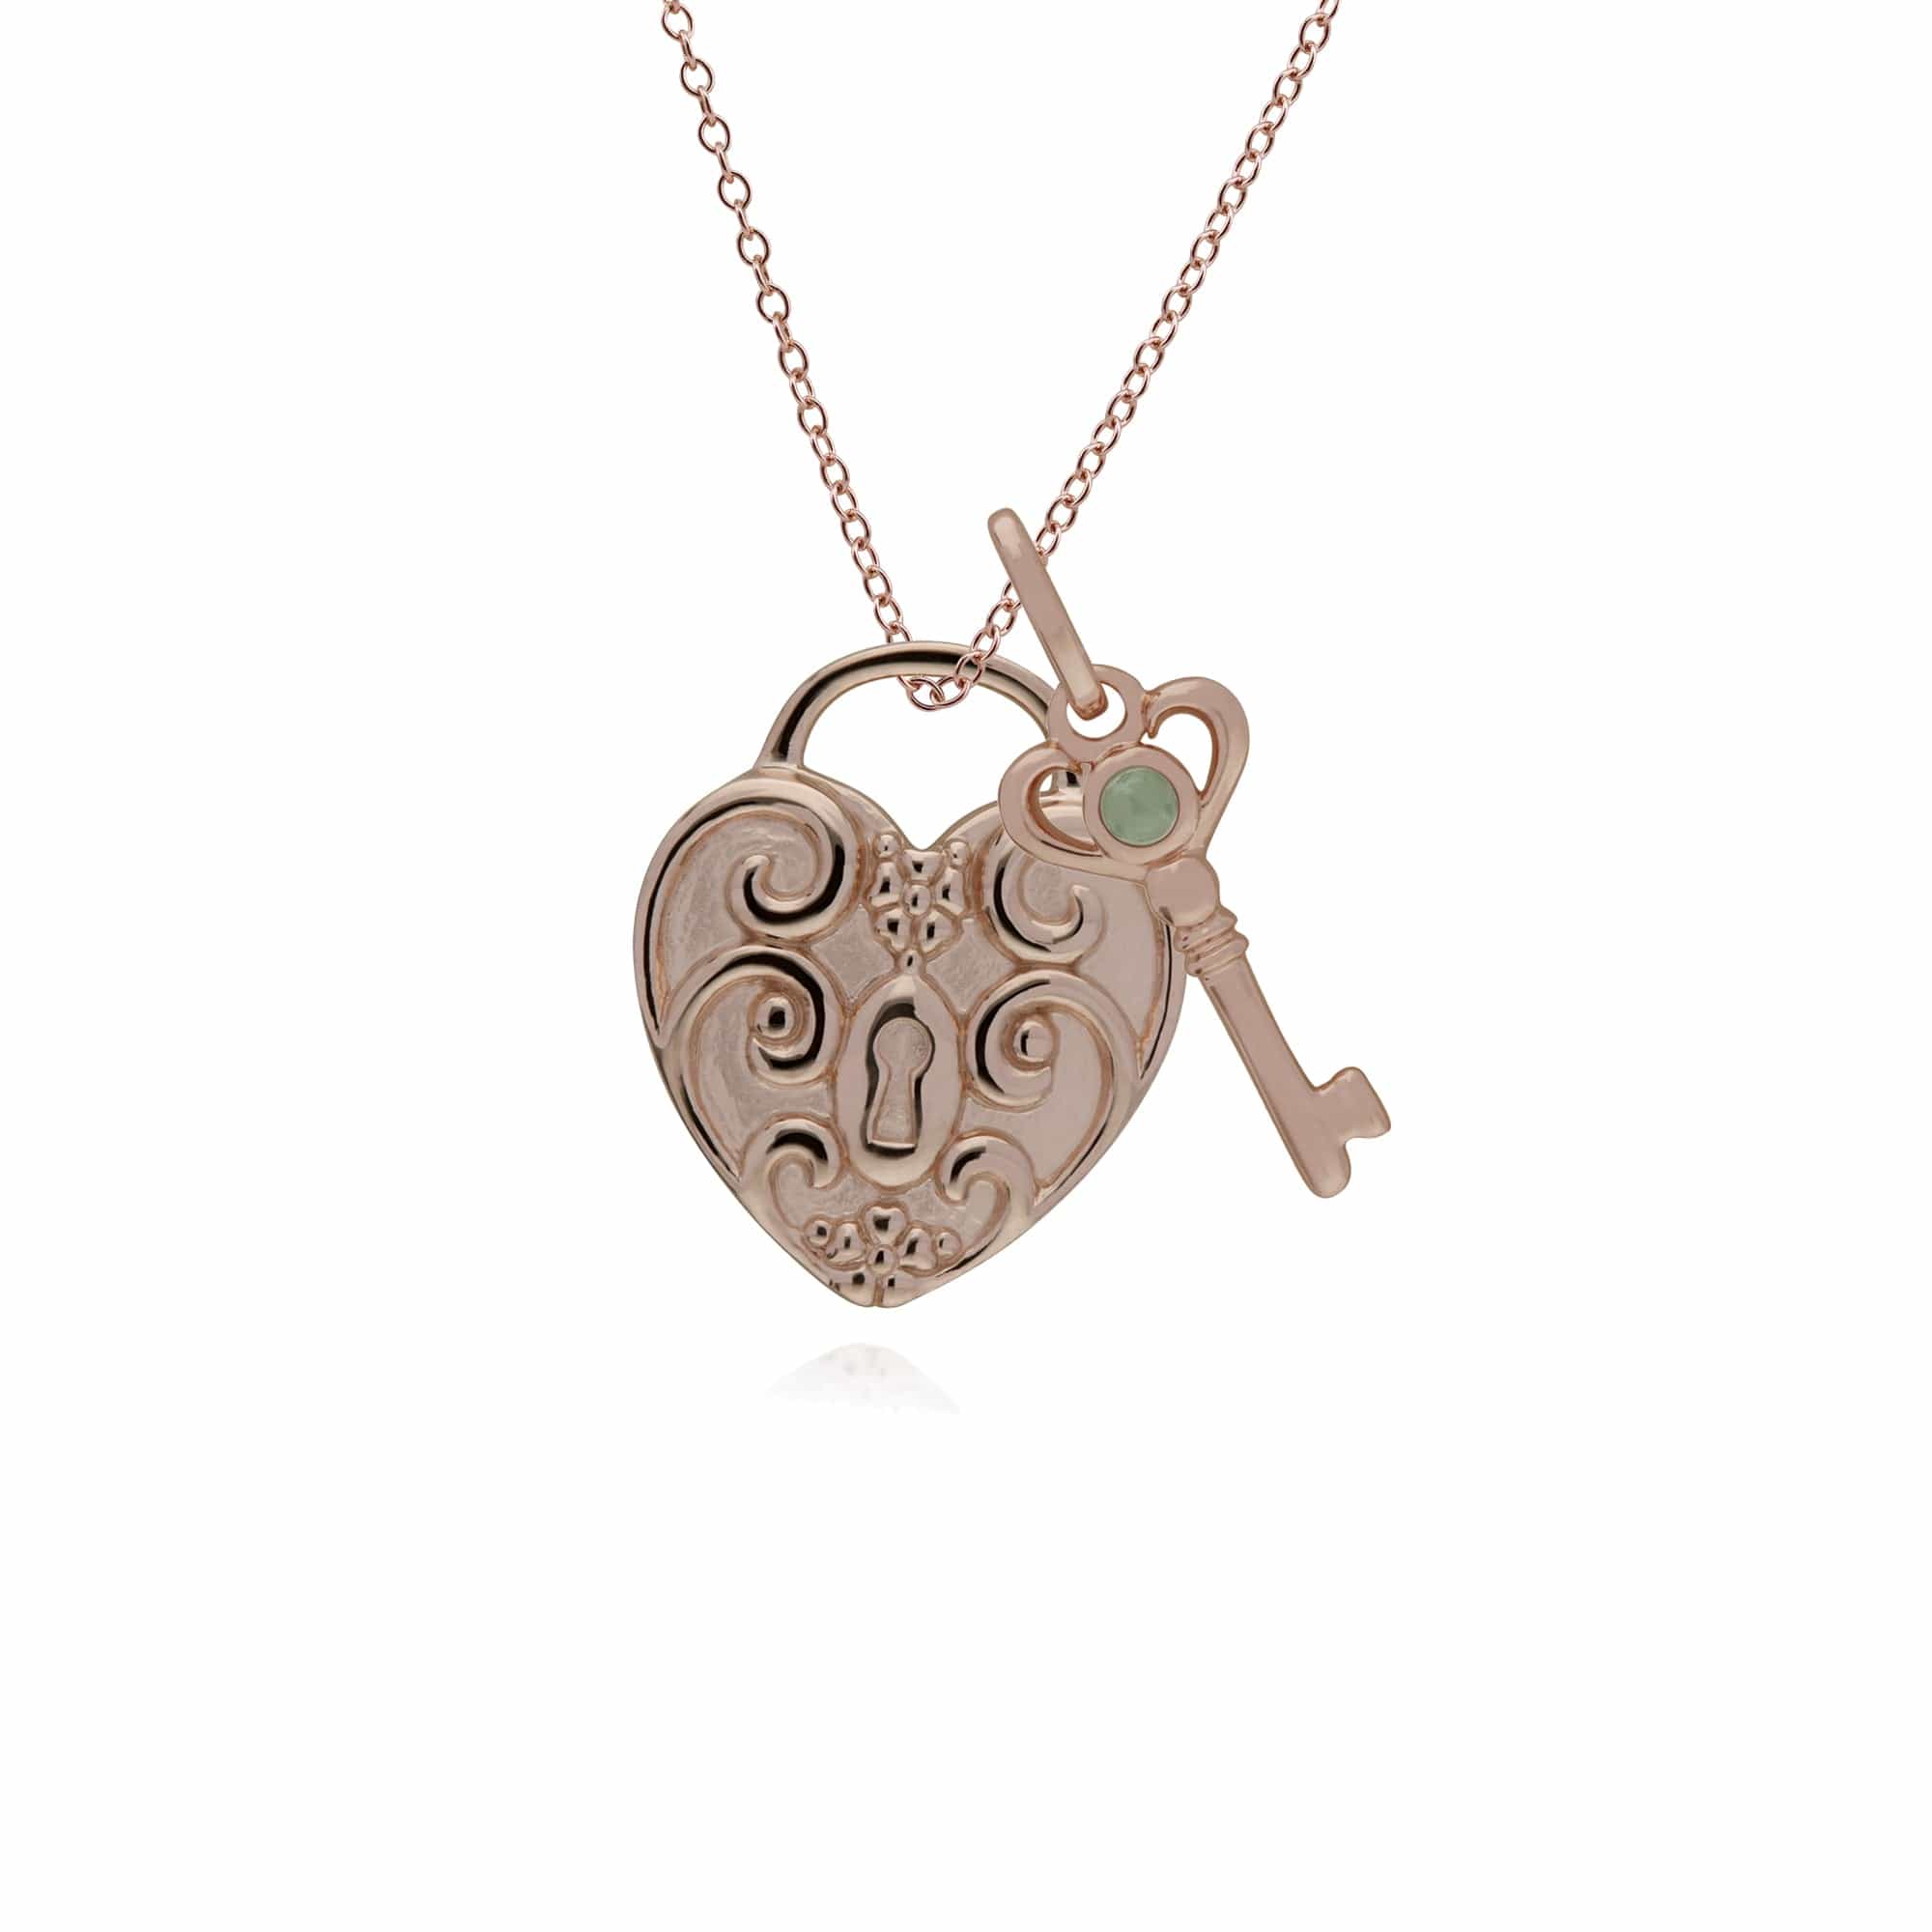 270P028603925-270P026501925 Classic Swirl Heart Lock Pendant & Jade Key Charm in Rose Gold Plated 925 Sterling Silver 1